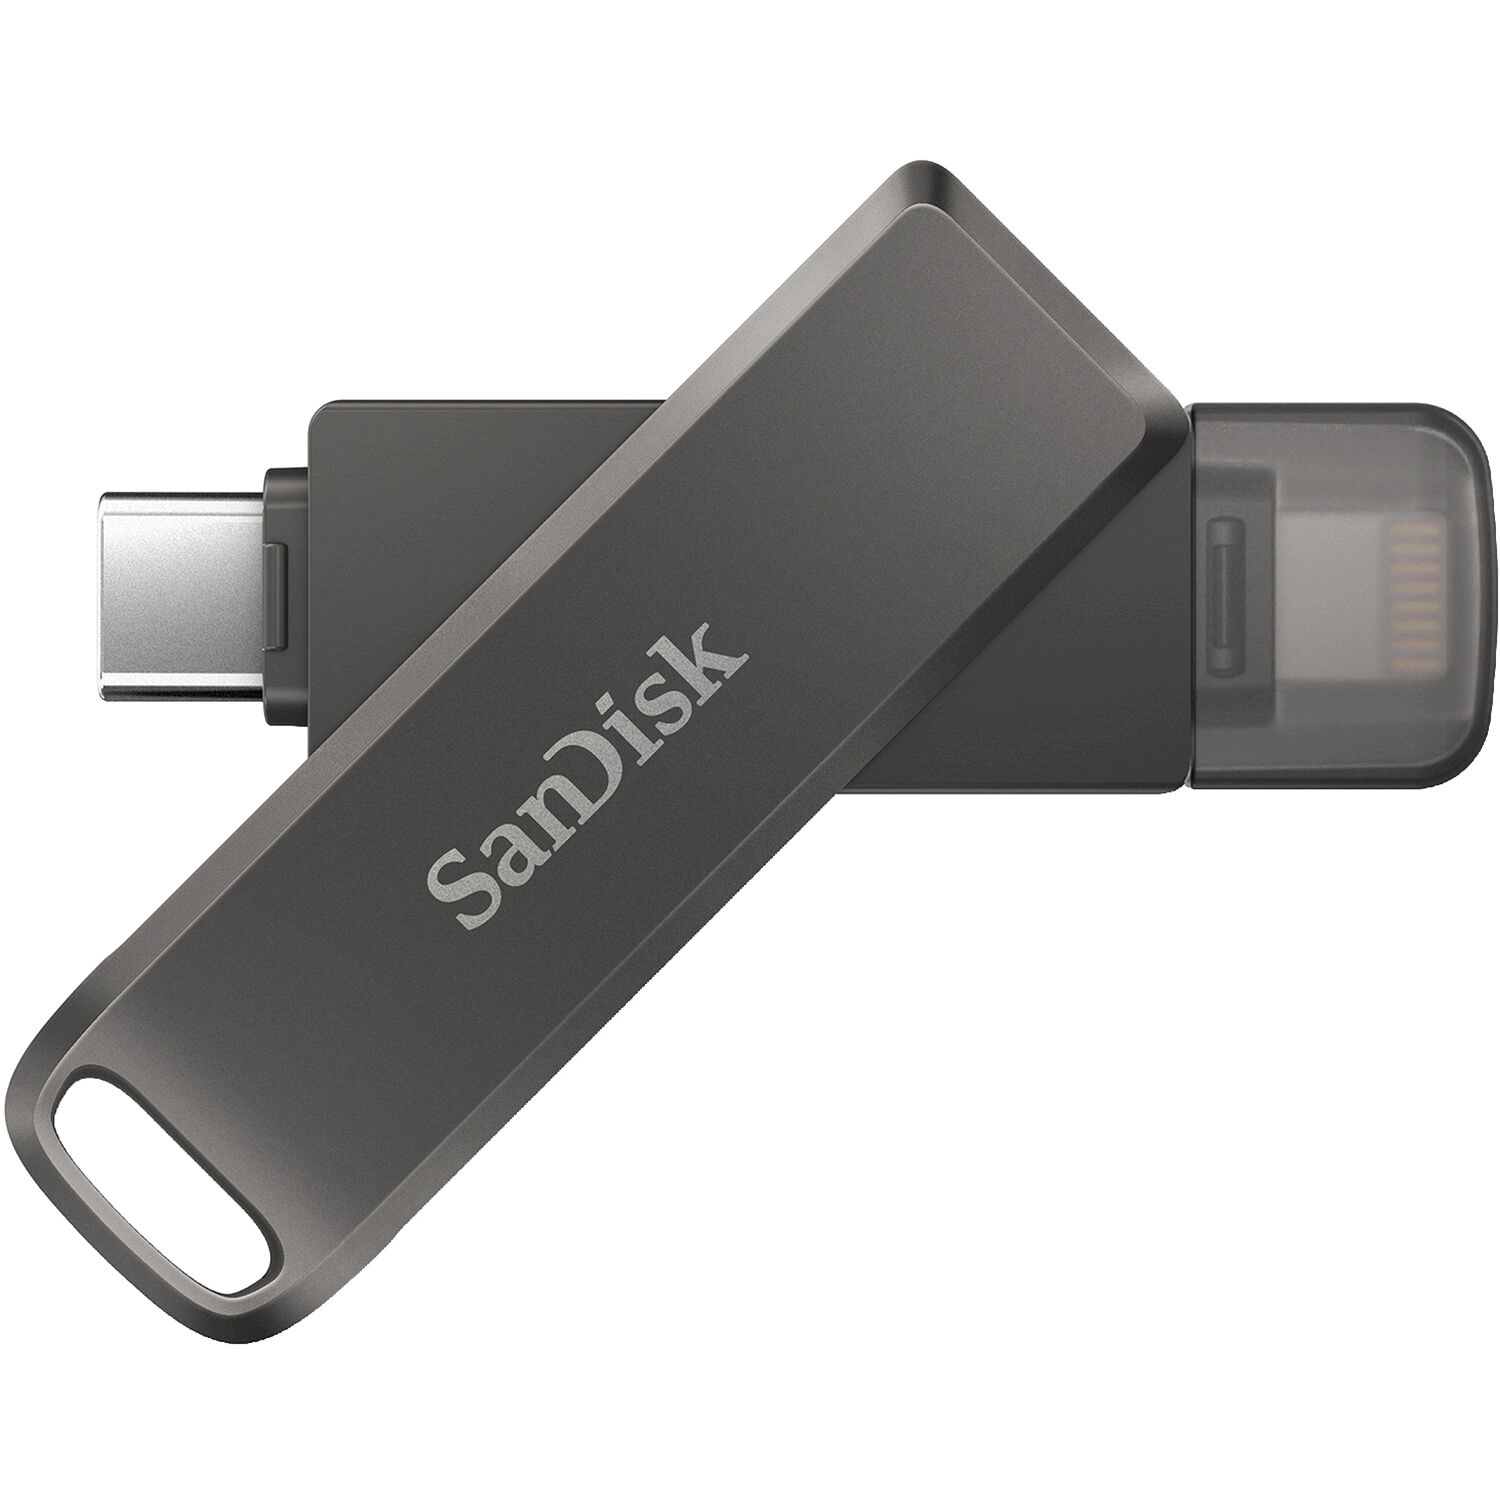 SanDisk iXpand Flash Drive Luxe 128GB - USB-C + Lightning - for iPhone, iPad, Mac, Android devices